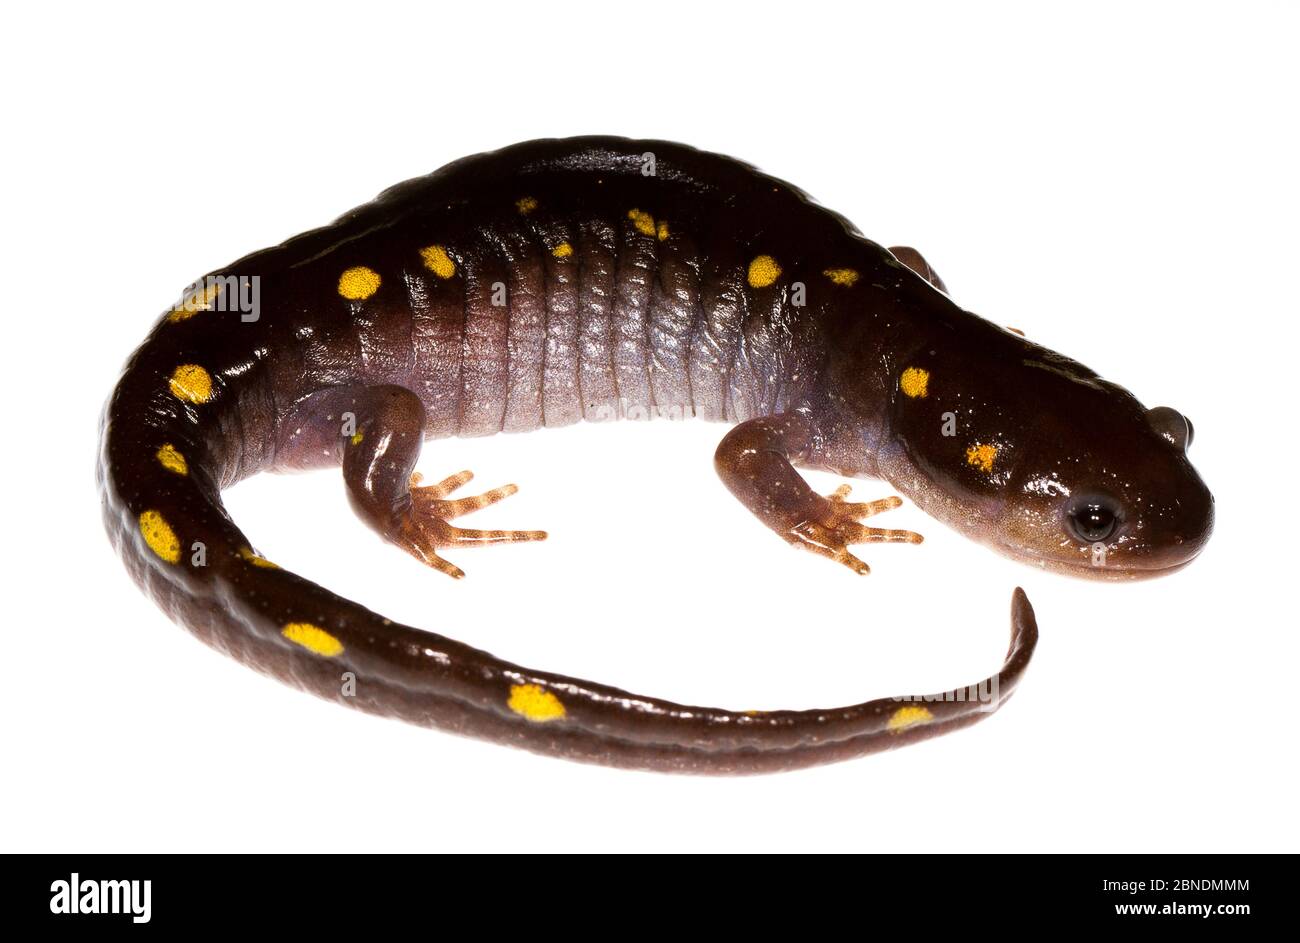 Spotted salamander (Ambystoma maculatum) Oxford, Mississippi, USA, March. Meetyourneighbours.net project Stock Photo